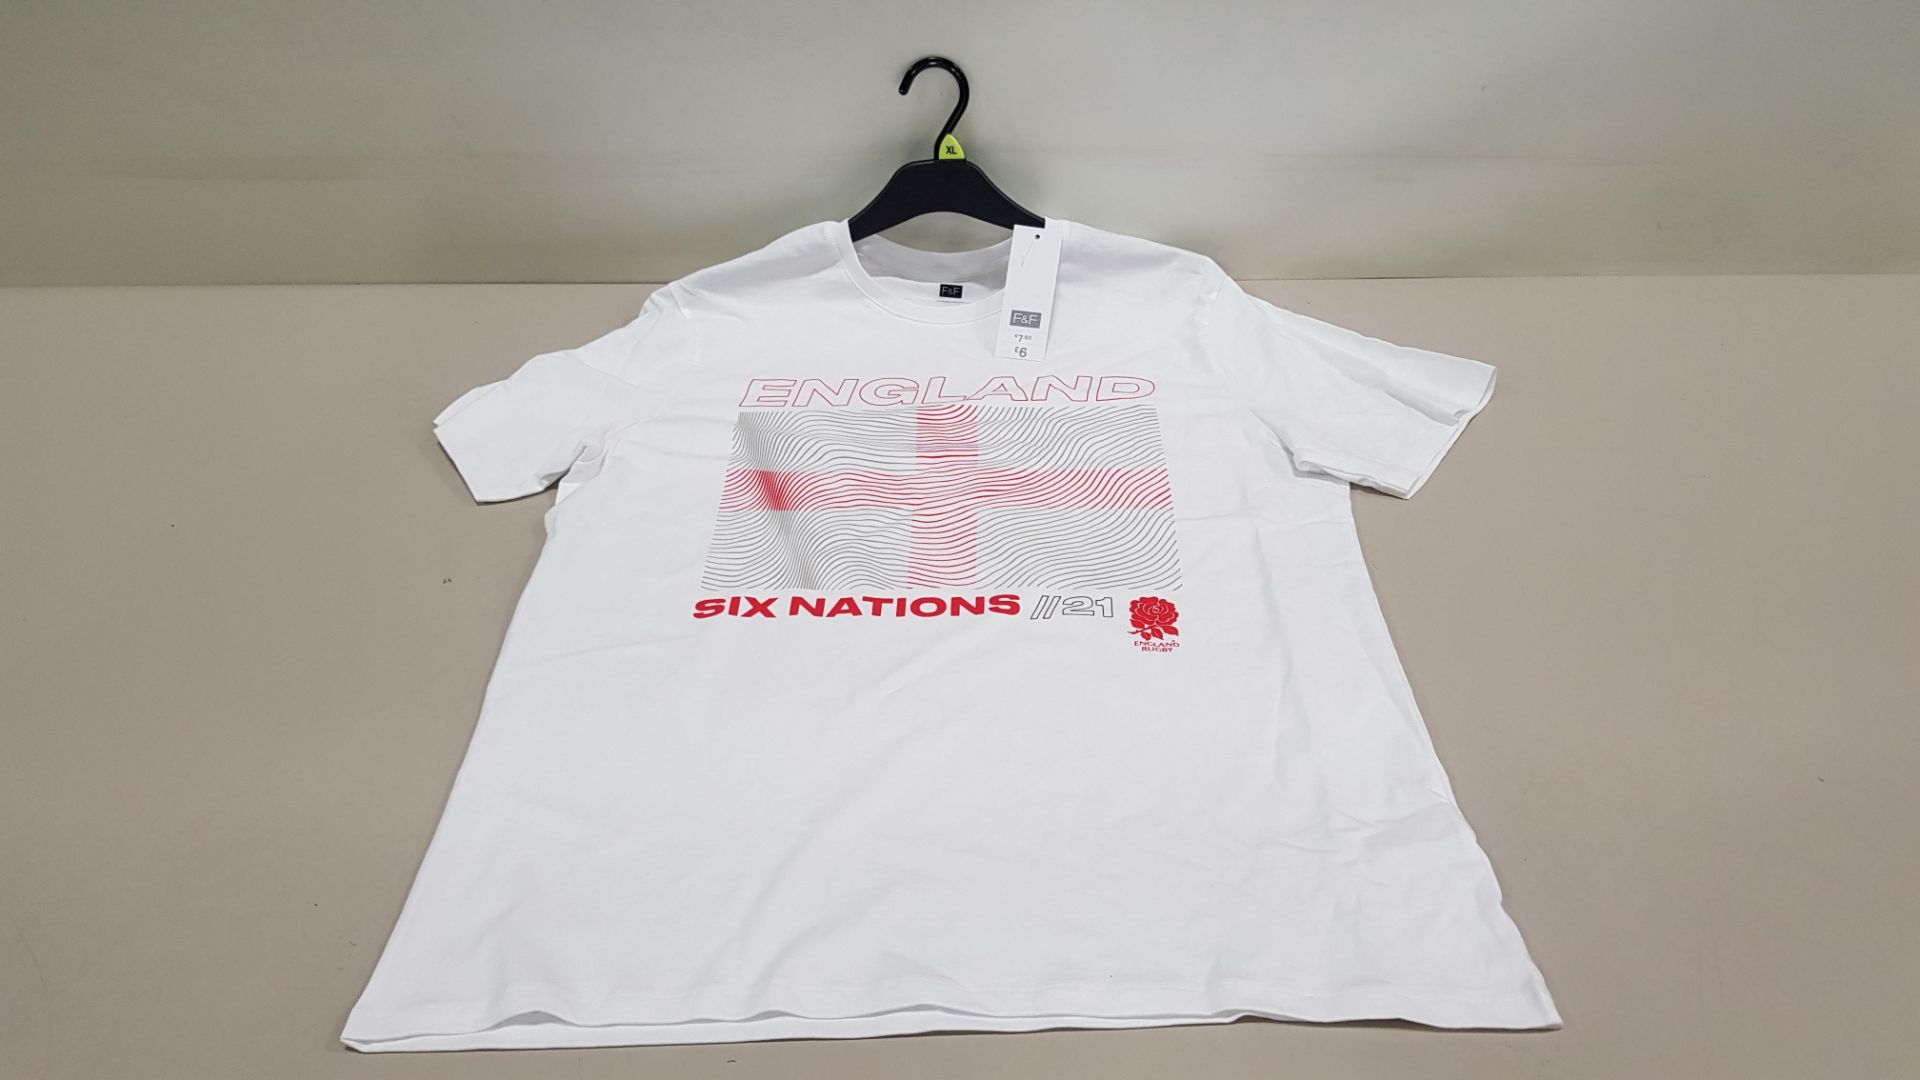 100 X BRAND NEW ENGLAND RUGBY SIX NATIONS 2021 CREWNECK T SHIRTS SIZE XL AND 2XL